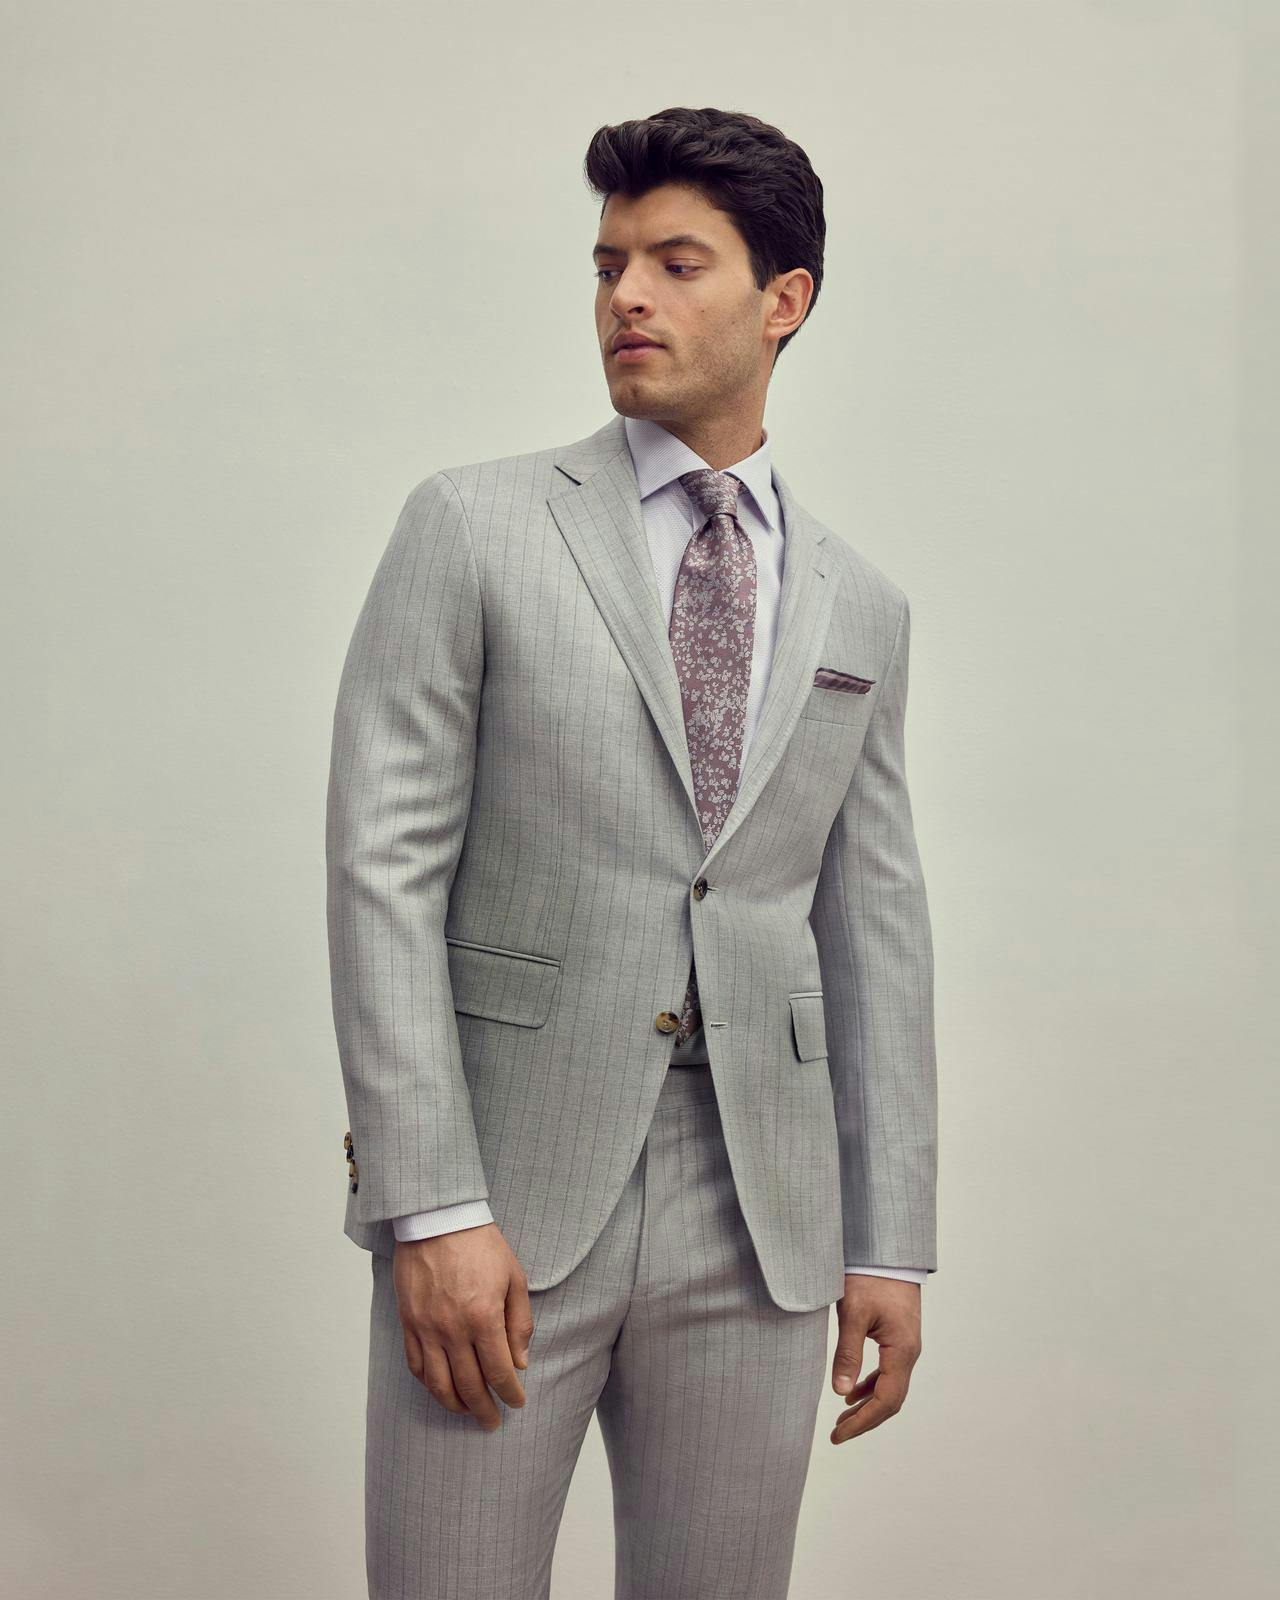 a male model in a light grey suit and pink tie